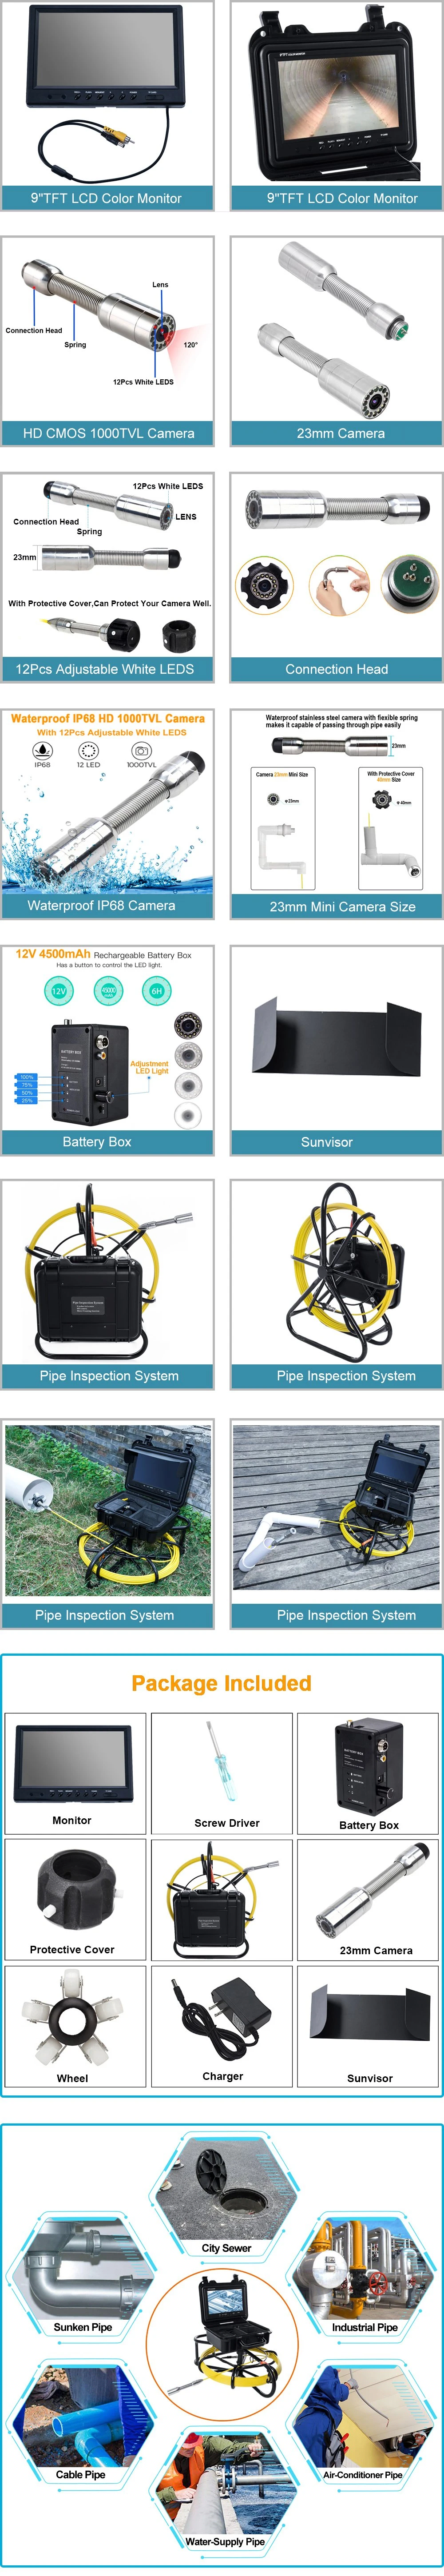 23mm Drain /Sewer/ Pipeline Industrial Endoscope Camera with DVR 9inch Monitor 20m Cable for Inspection